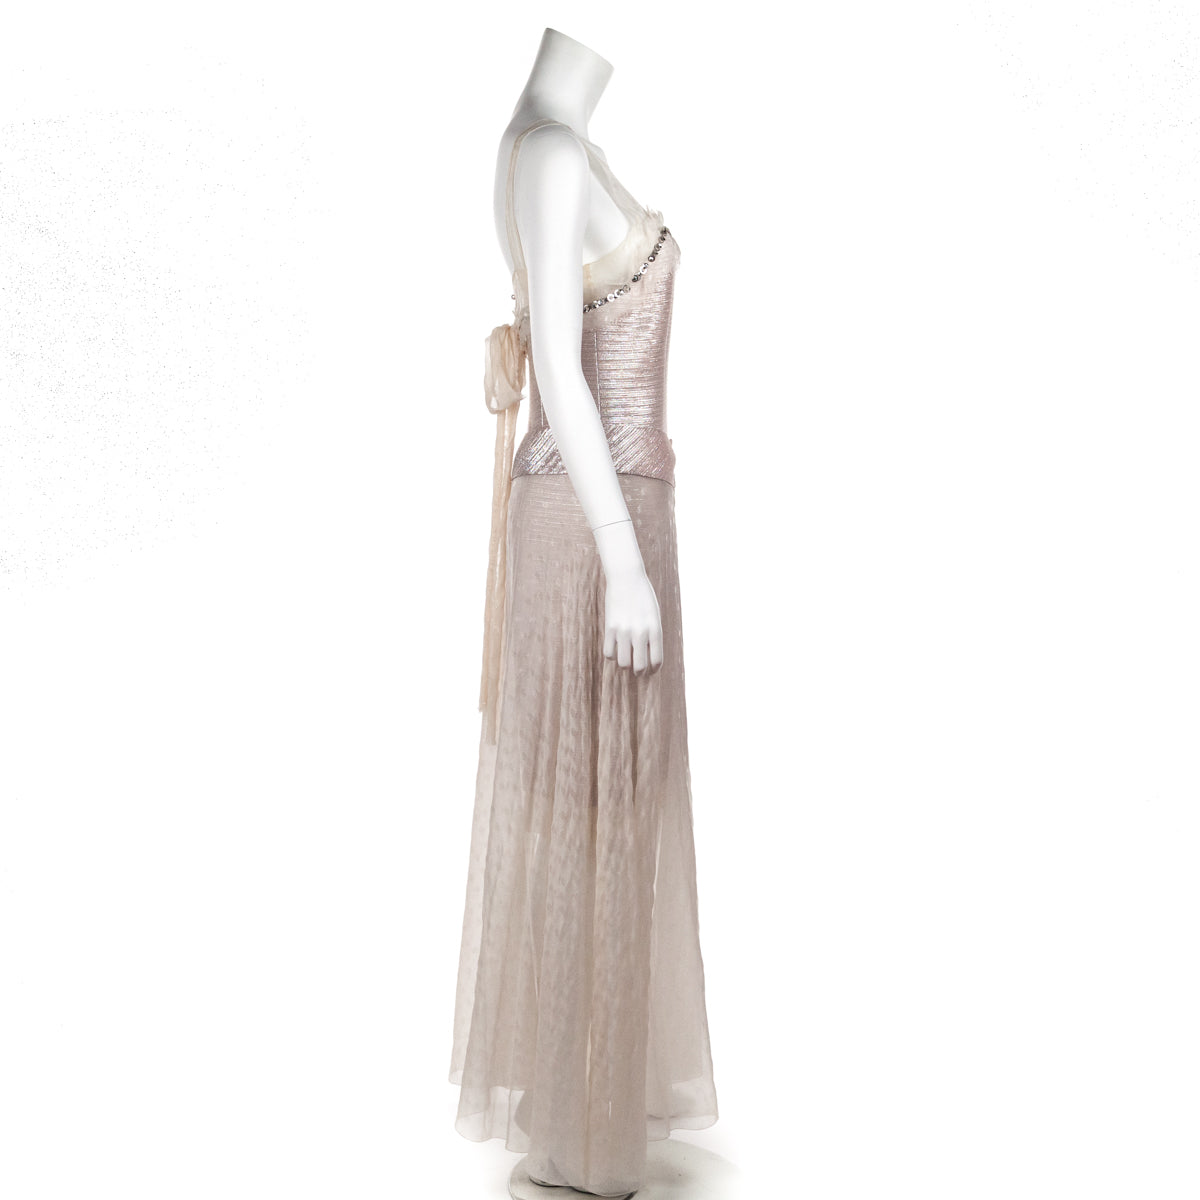 CHANEL Dress one piece P71619K10290 Cashmere Pink Used Women size #36